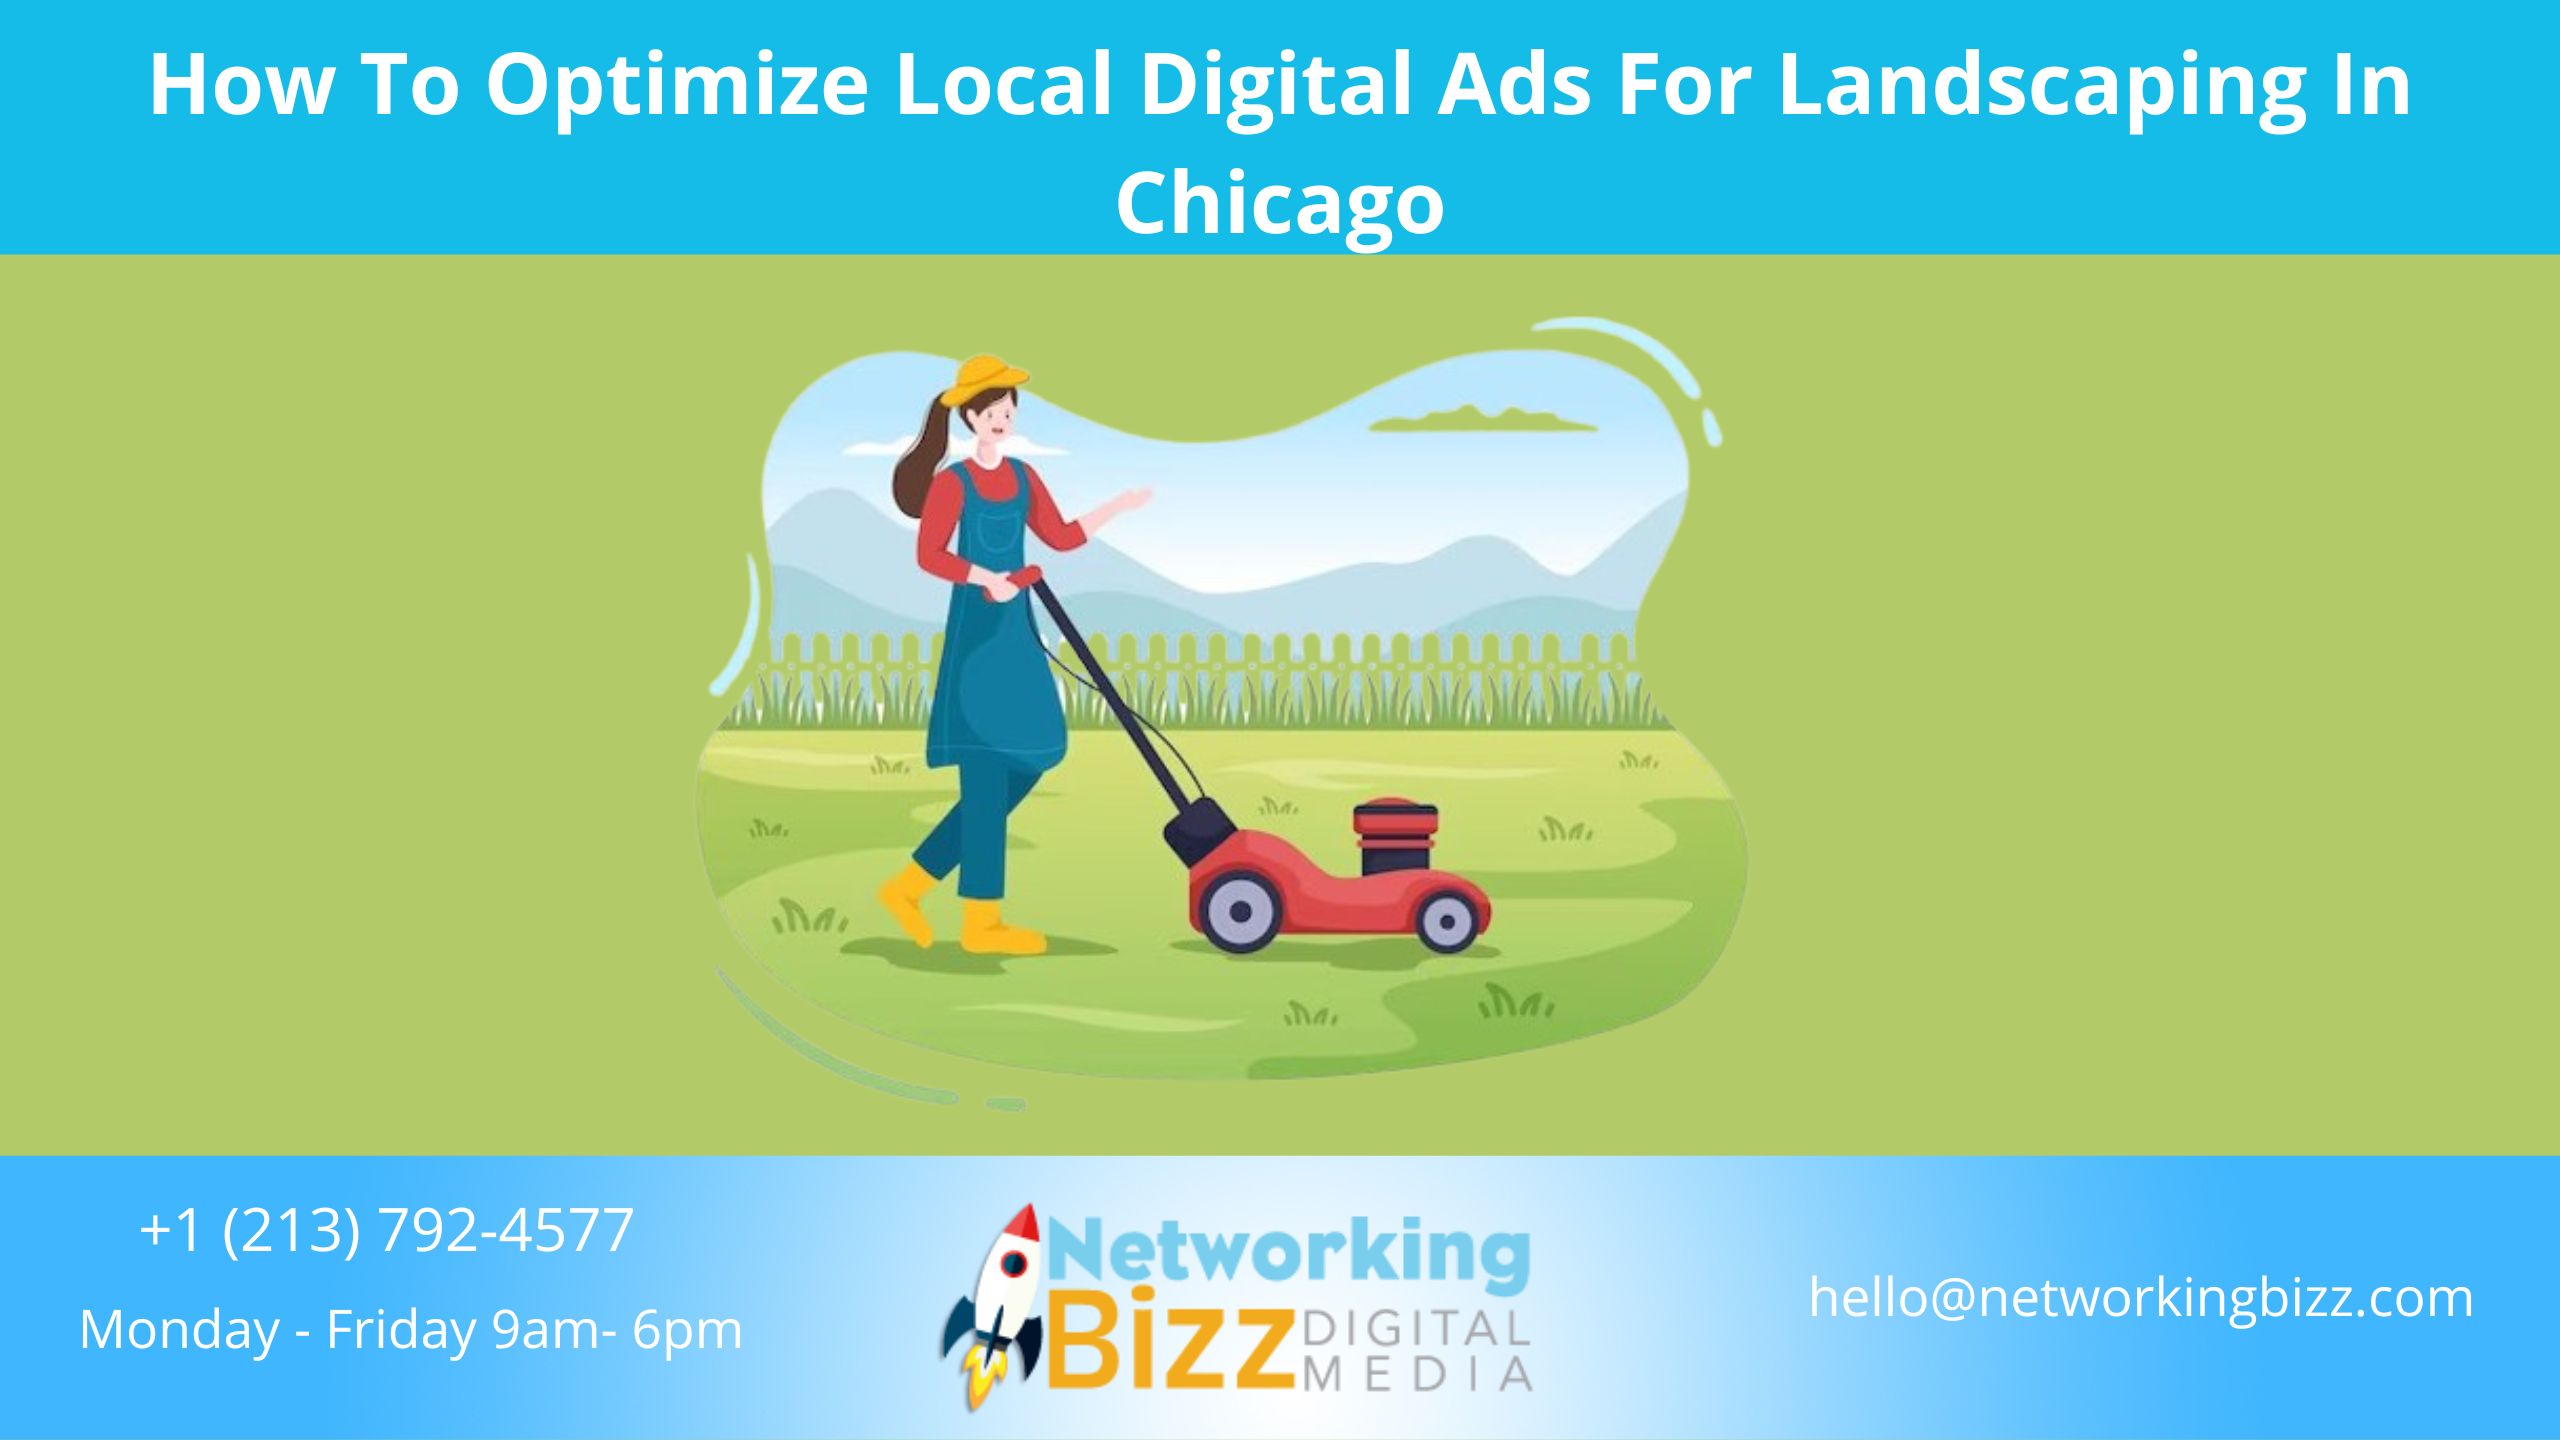 How To Optimize Local Digital Ads For Landscaping In Chicago